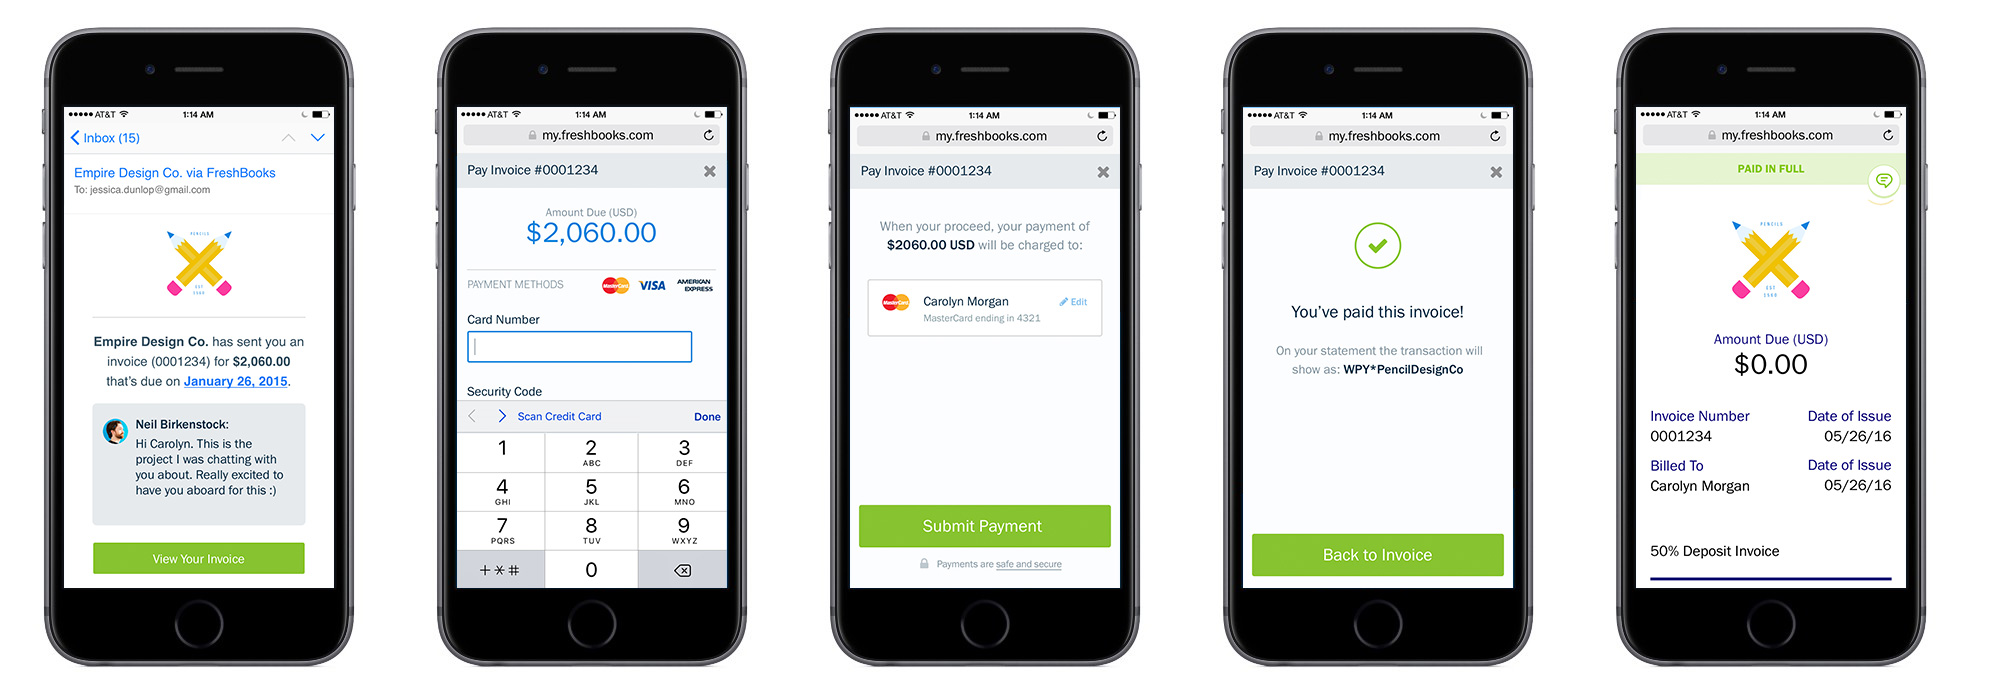 Mobile Payment Experience via Credit Card